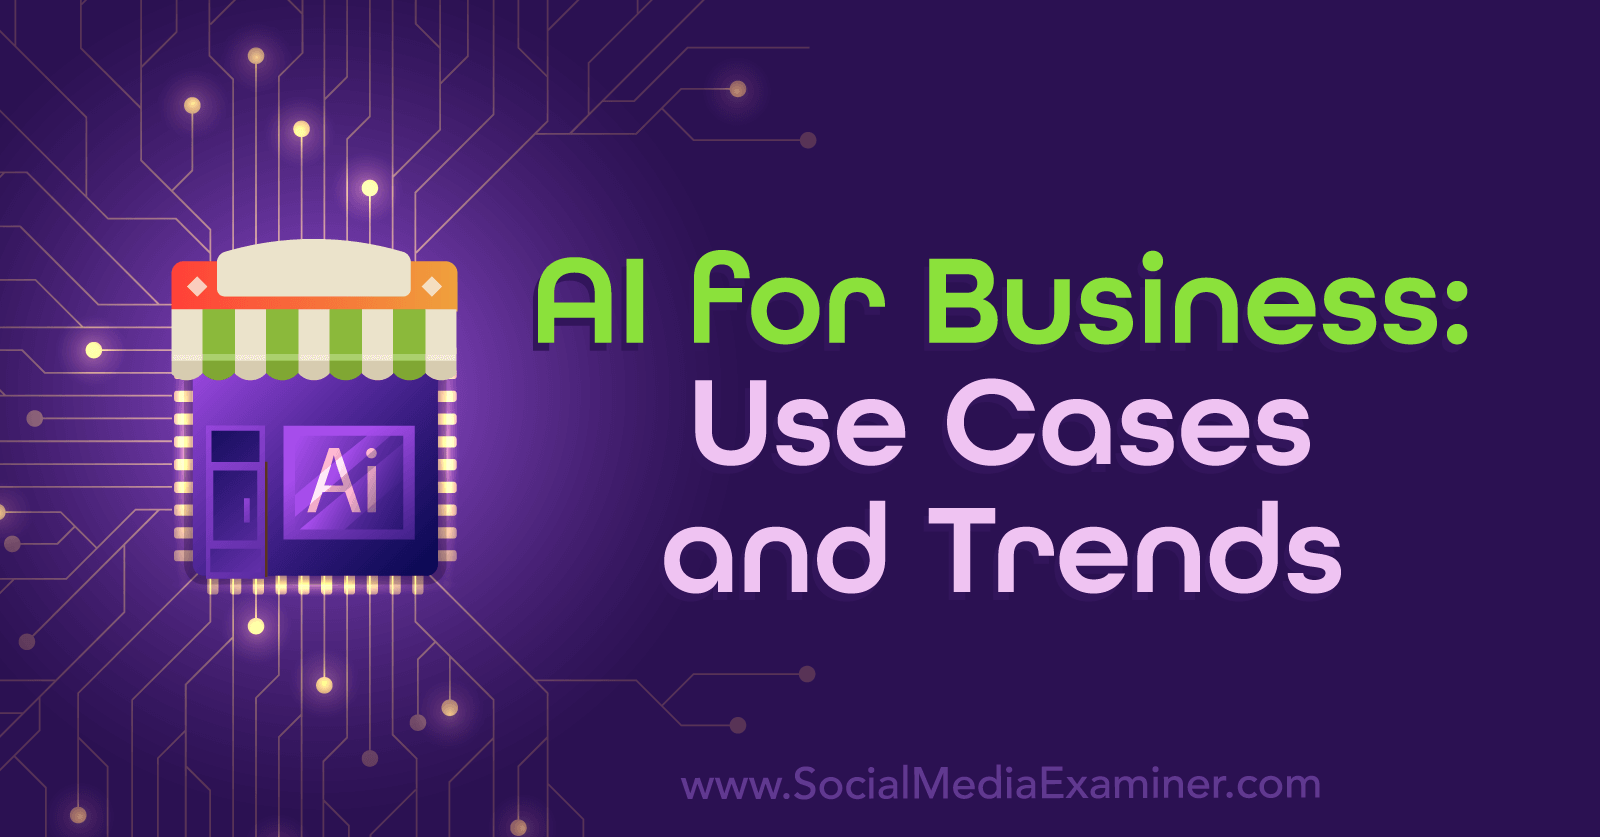 AI for Business: Use Cases and Trends by Social Media Examiner